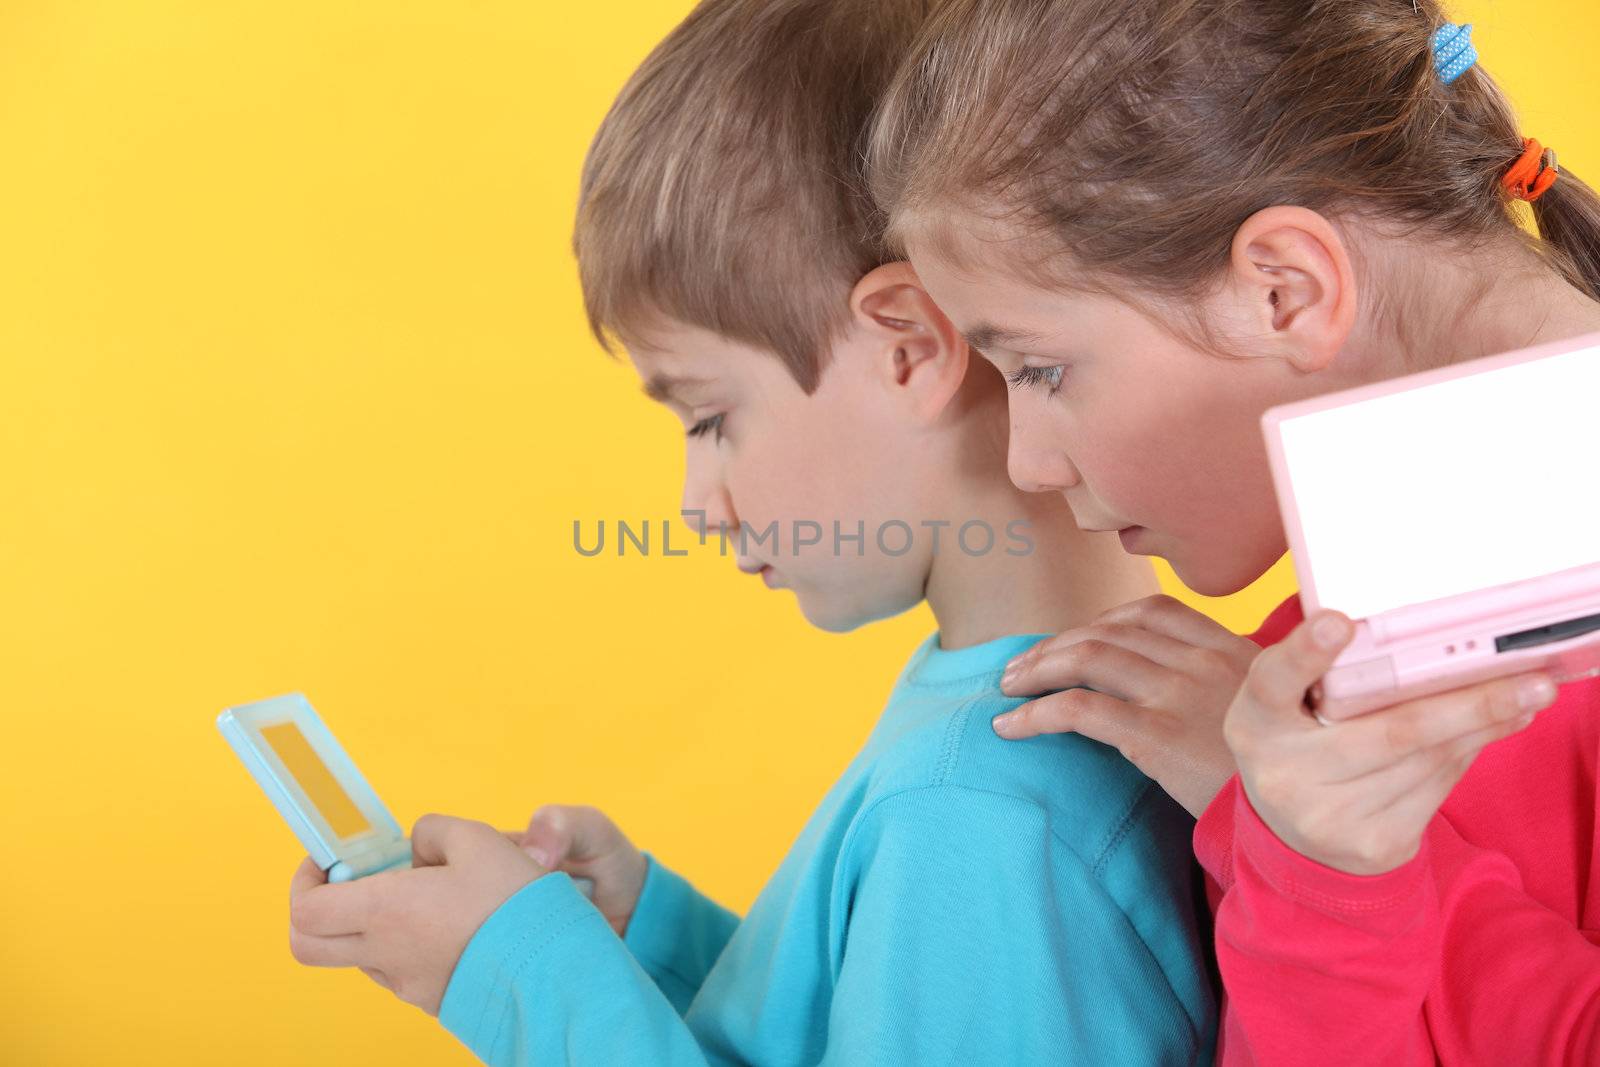 Children playing handheld video games by phovoir